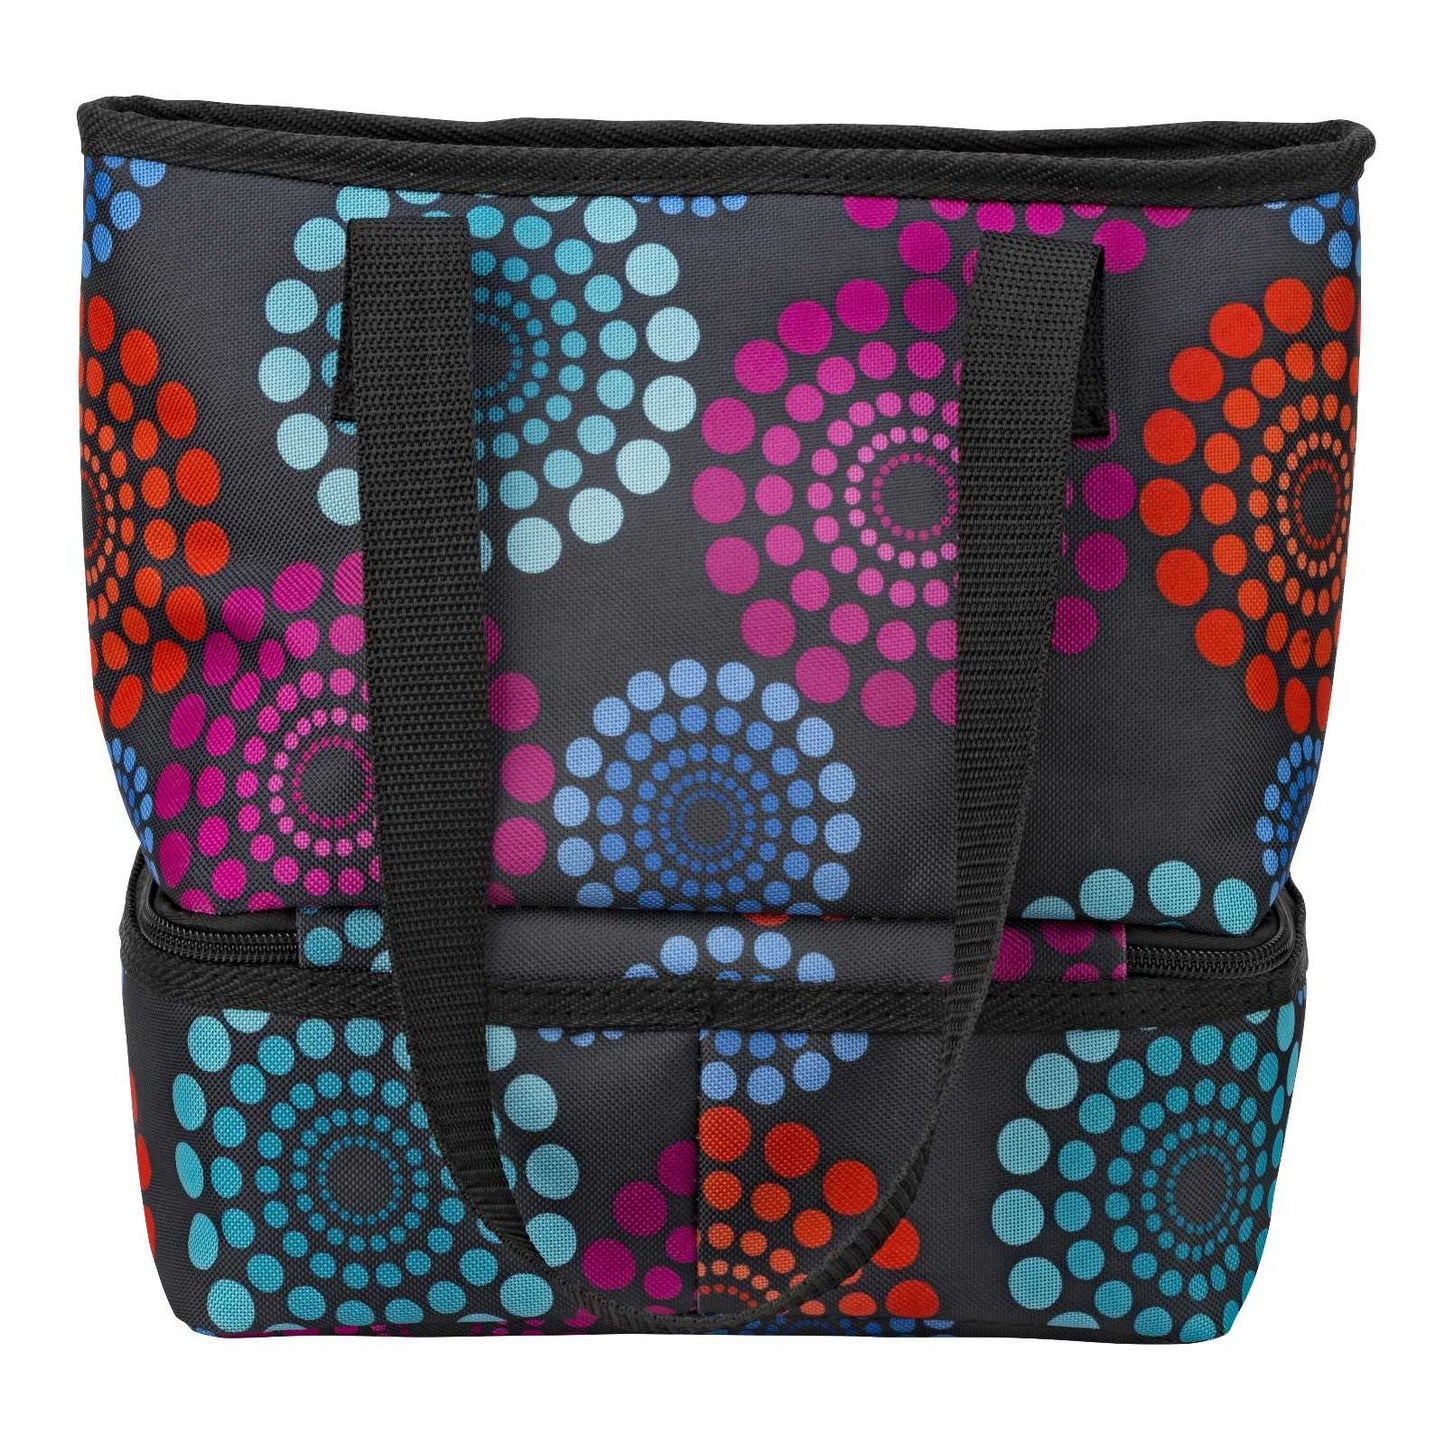 Insulated Meal & Snack Bag - Bright Lights